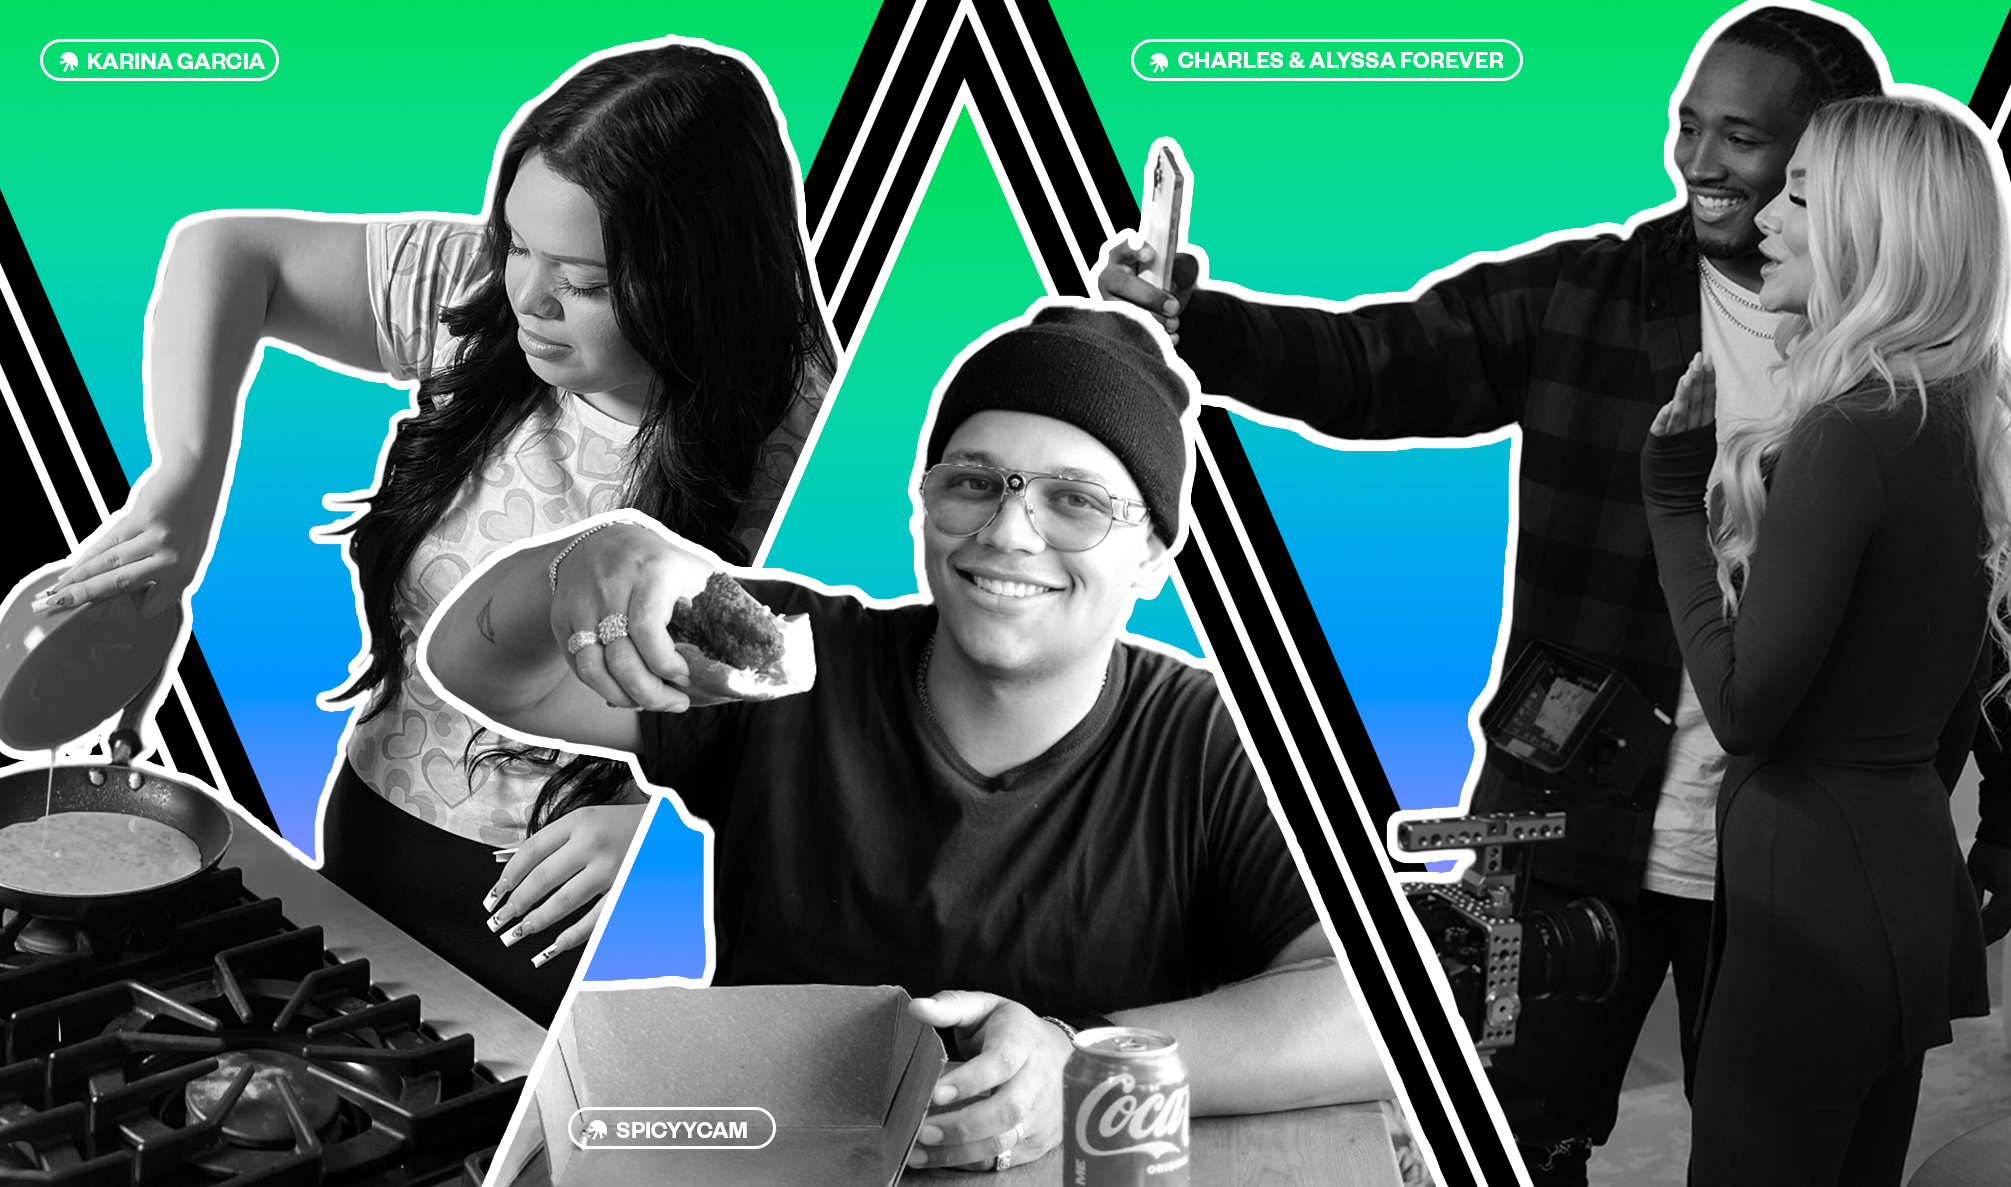 black and white triptych with creators Karina Garcia cooking, SpicyyCam holding a hot dog, and Charles and Alyssa holding a phone and taking a selfie. Blue and green colors in the background.